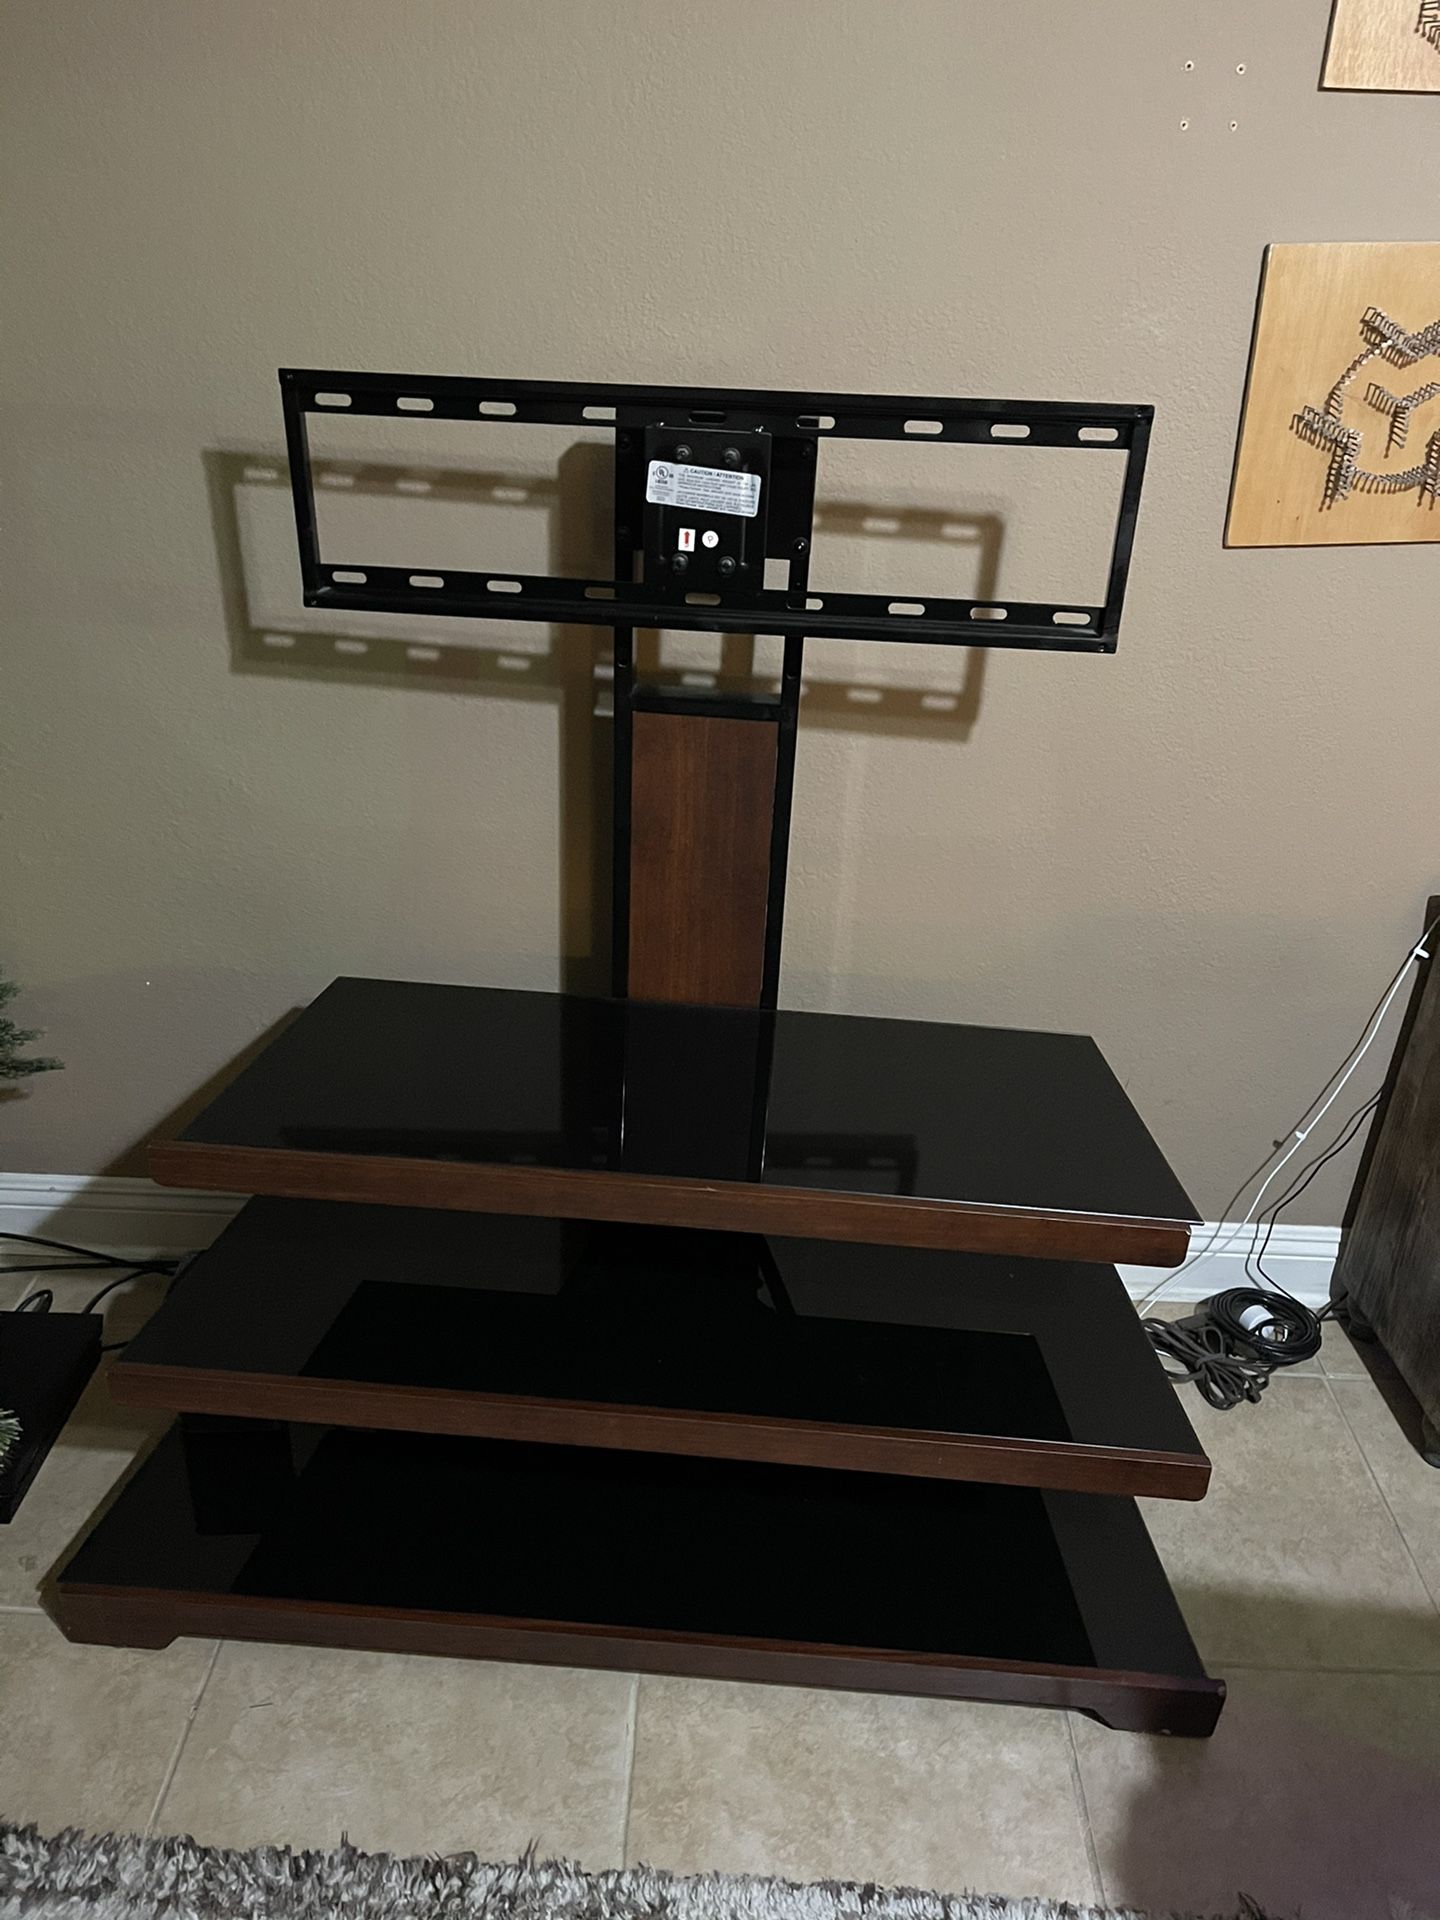 Tv stand with rotating mount attached.